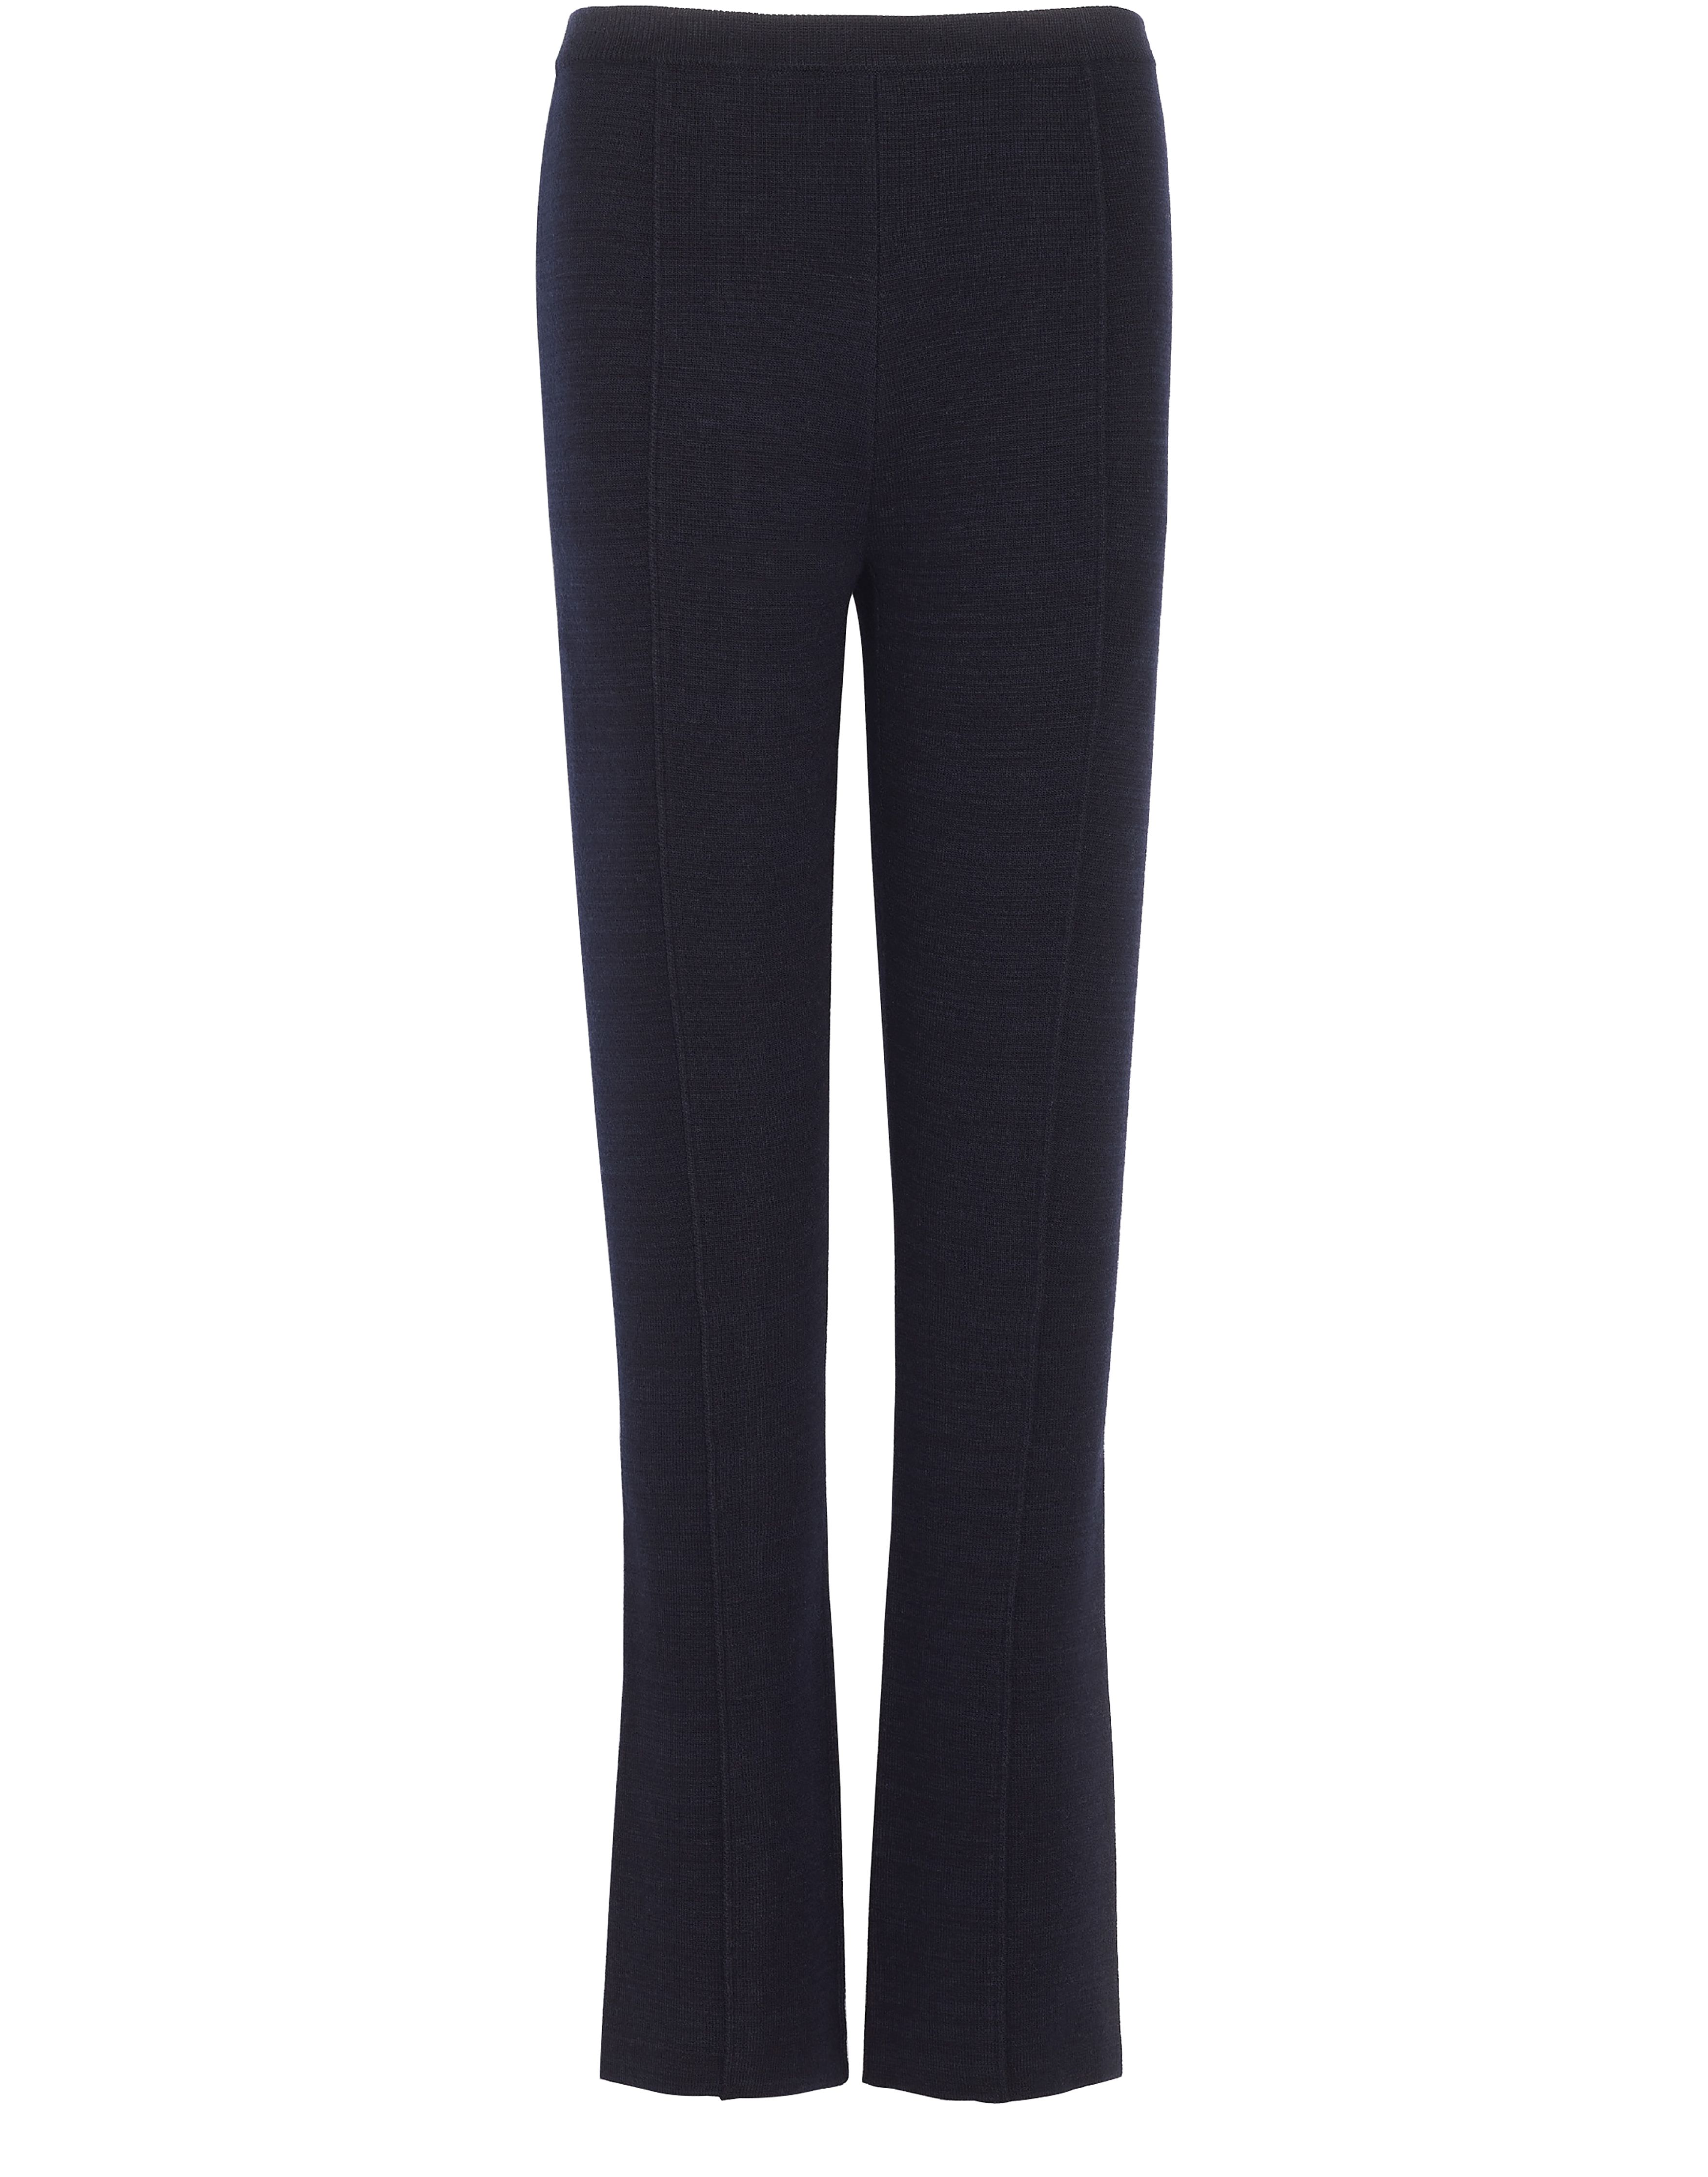 Barrie Cashmere and wool leggings